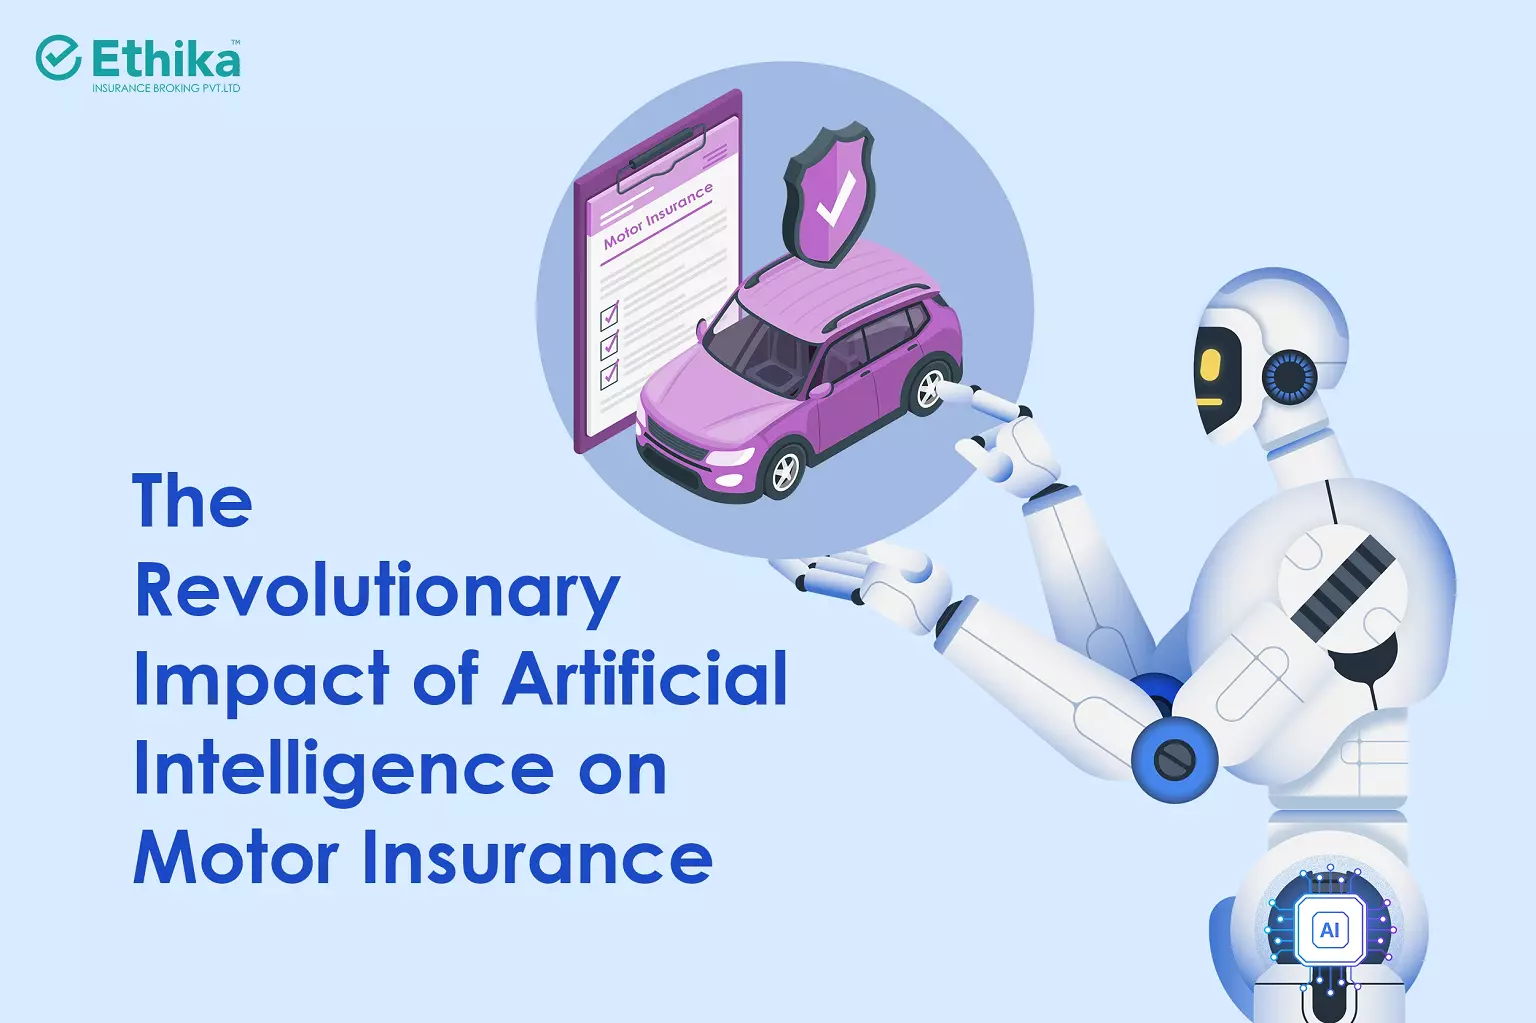 The Revolutionary Impact of Artificial Intelligence on Motor Insurance